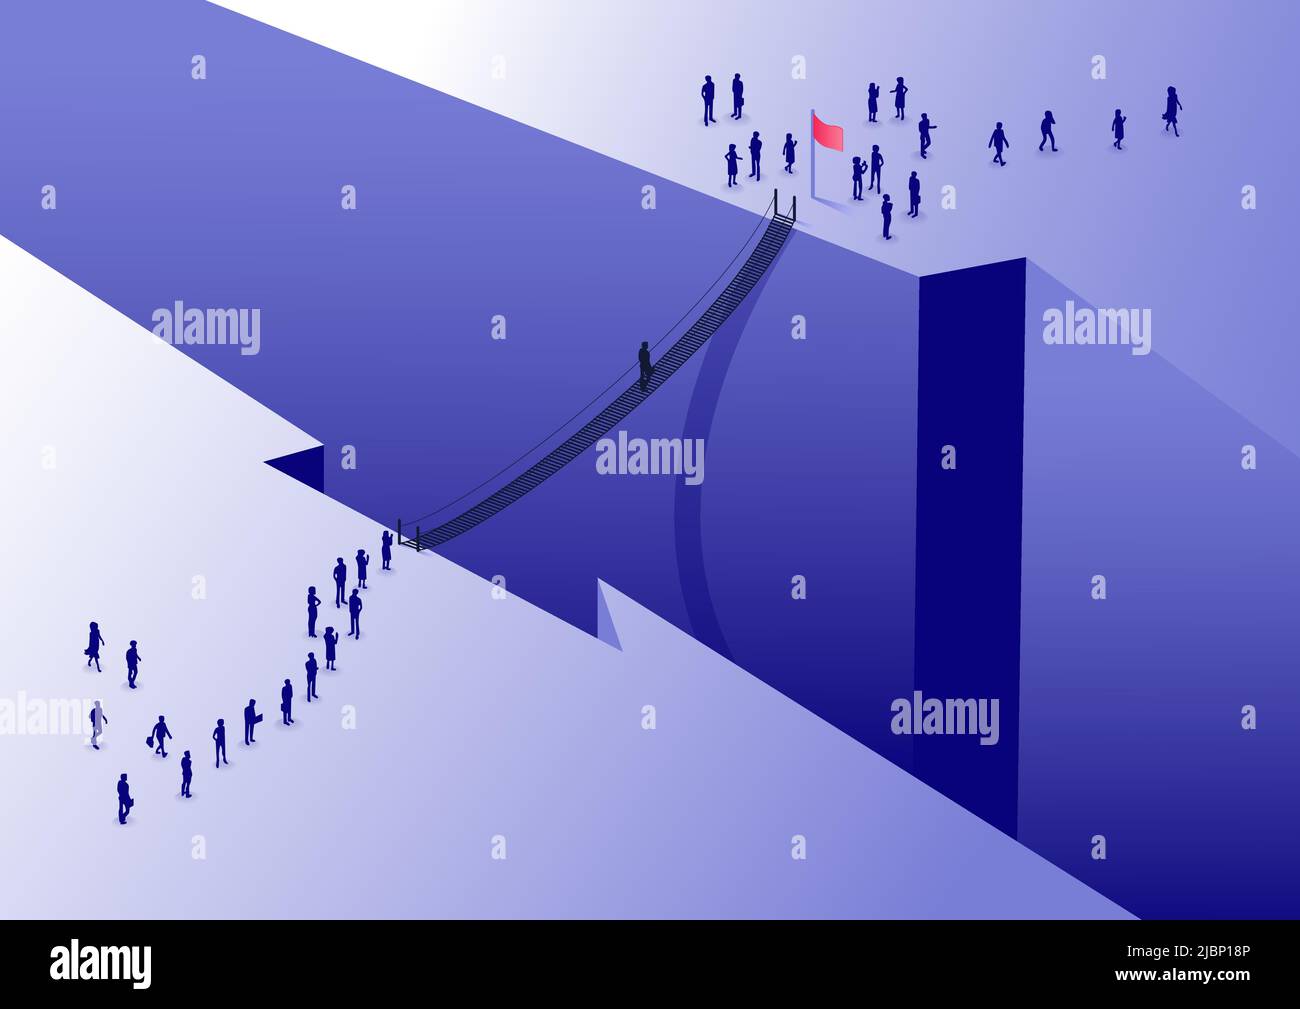 Business concept of overcoming adversity and challenges. Man crossing a valley on a hanging bridge that connects two surfaces. Isometric illustration Stock Vector